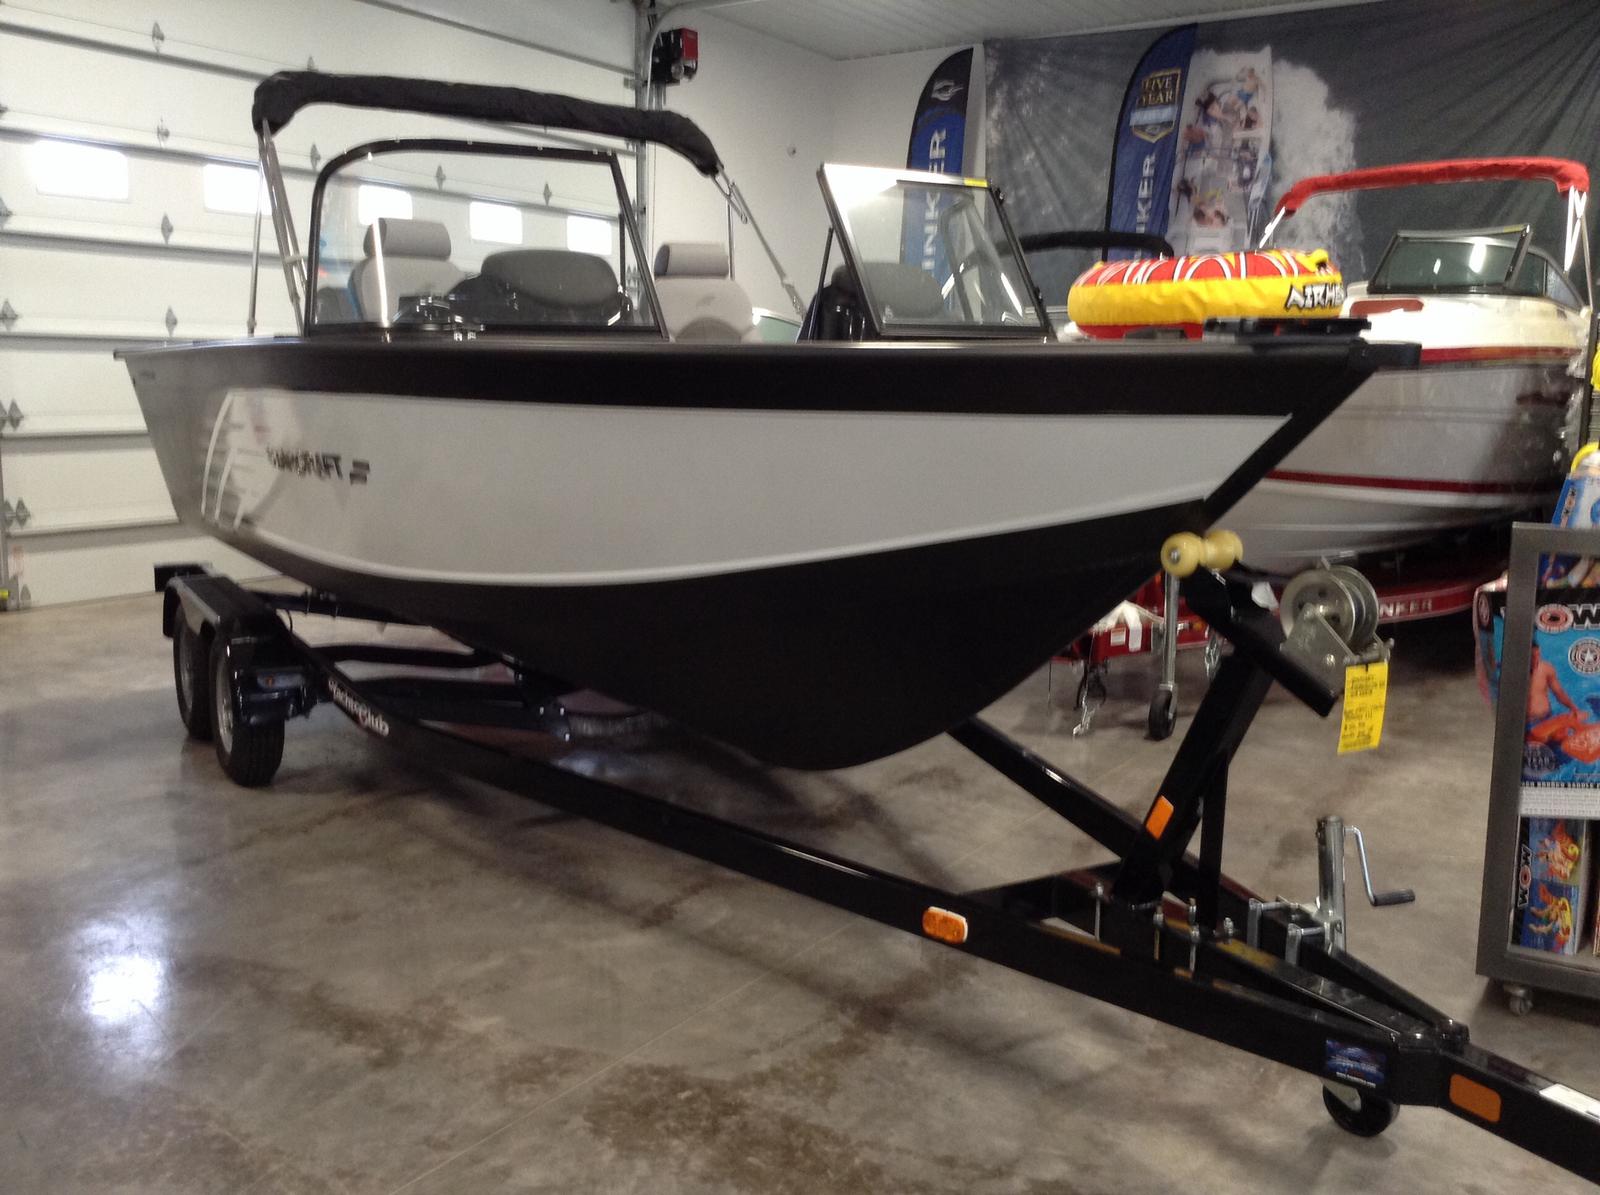 Starcraft 196 Fishmaster boats for sale